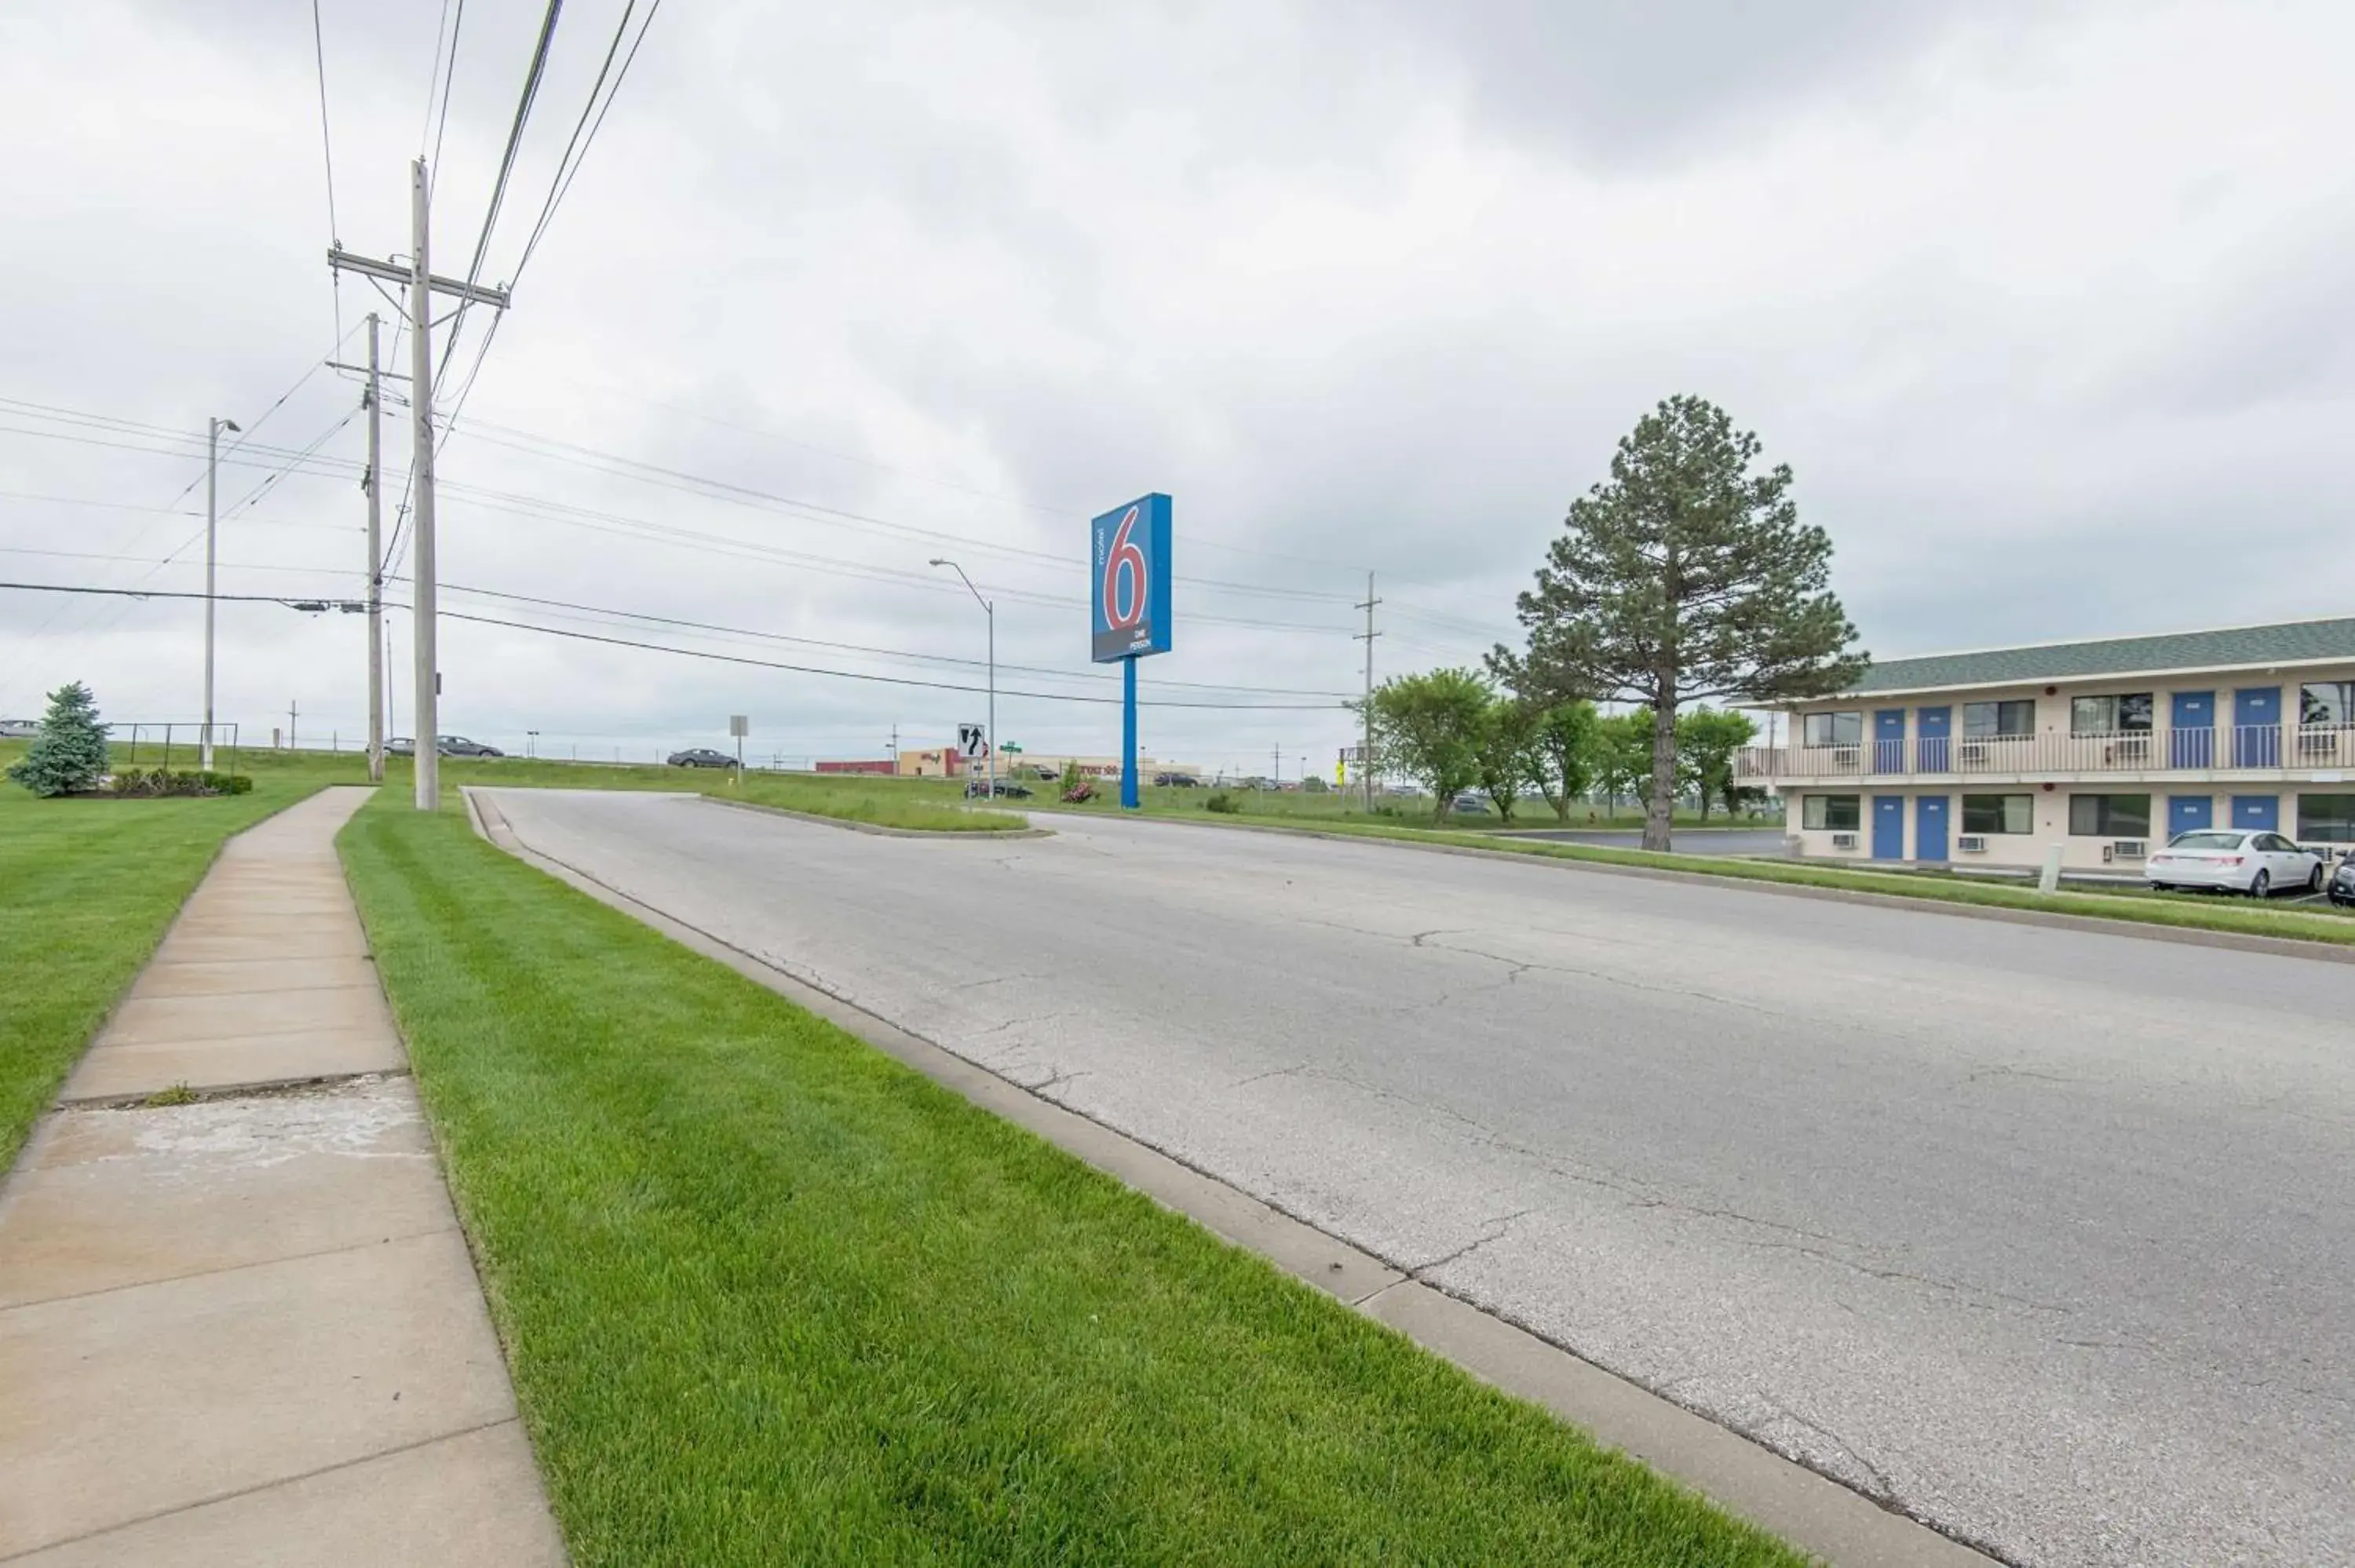 Property building in Motel 6-Kansas City, MO - Airport